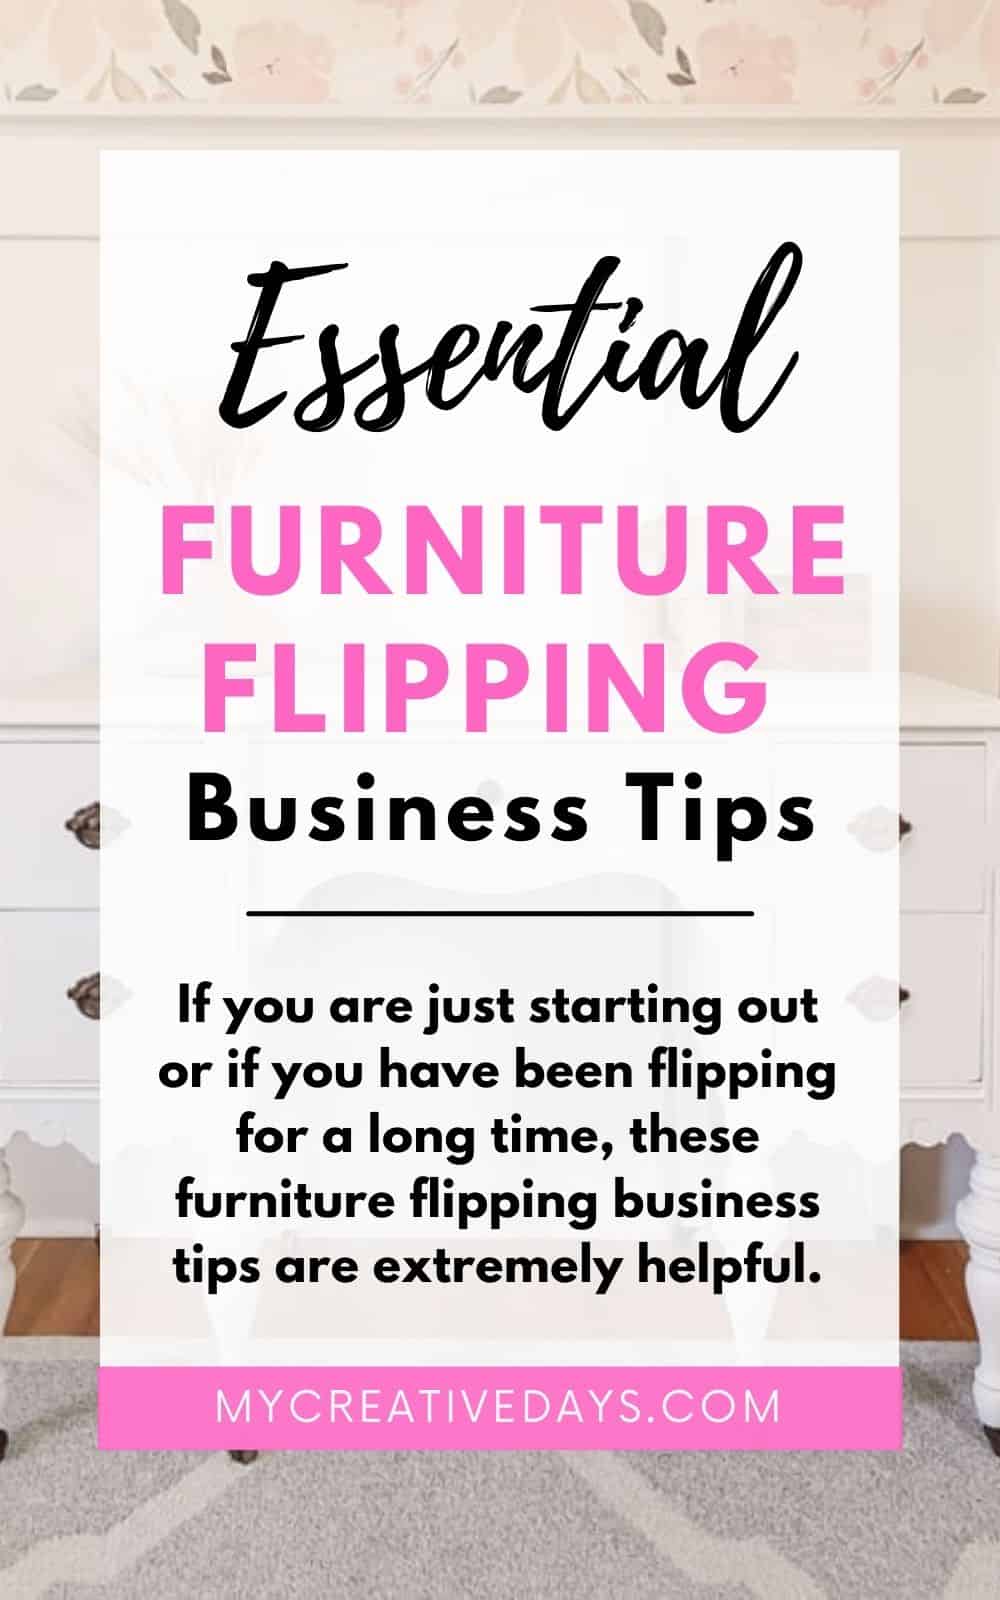 If you are just starting out or if you have been flipping for a long time, these furniture flipping business tips are extremely helpful.